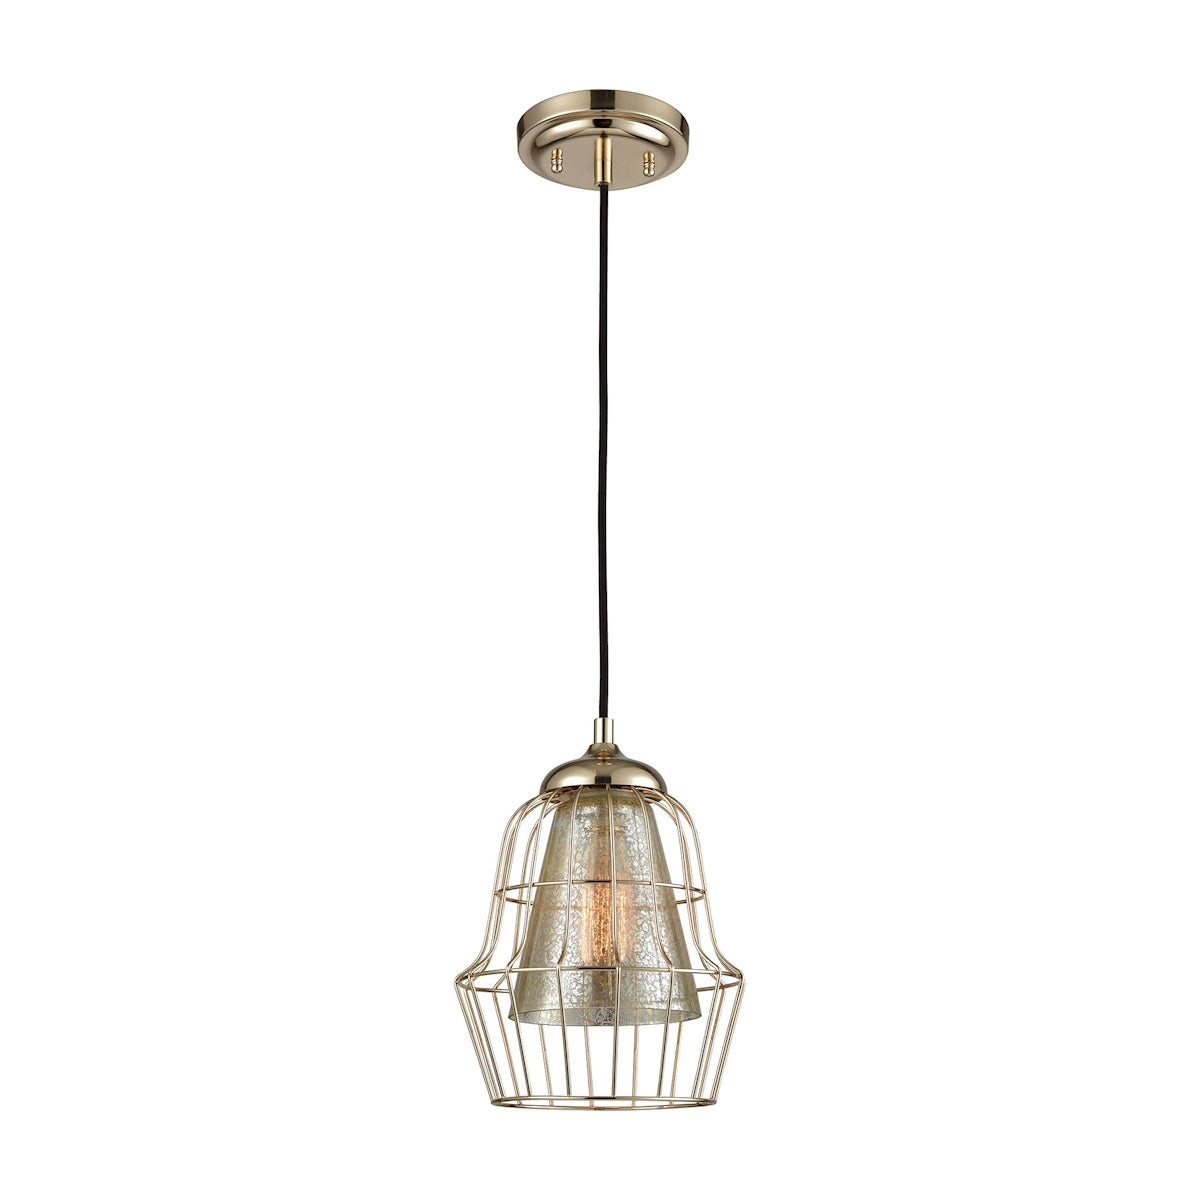 ELK Lighting 14266/1 Yardley 1-Light Mini Pendant in Polished Gold with Mercury Glass and Wire Cage